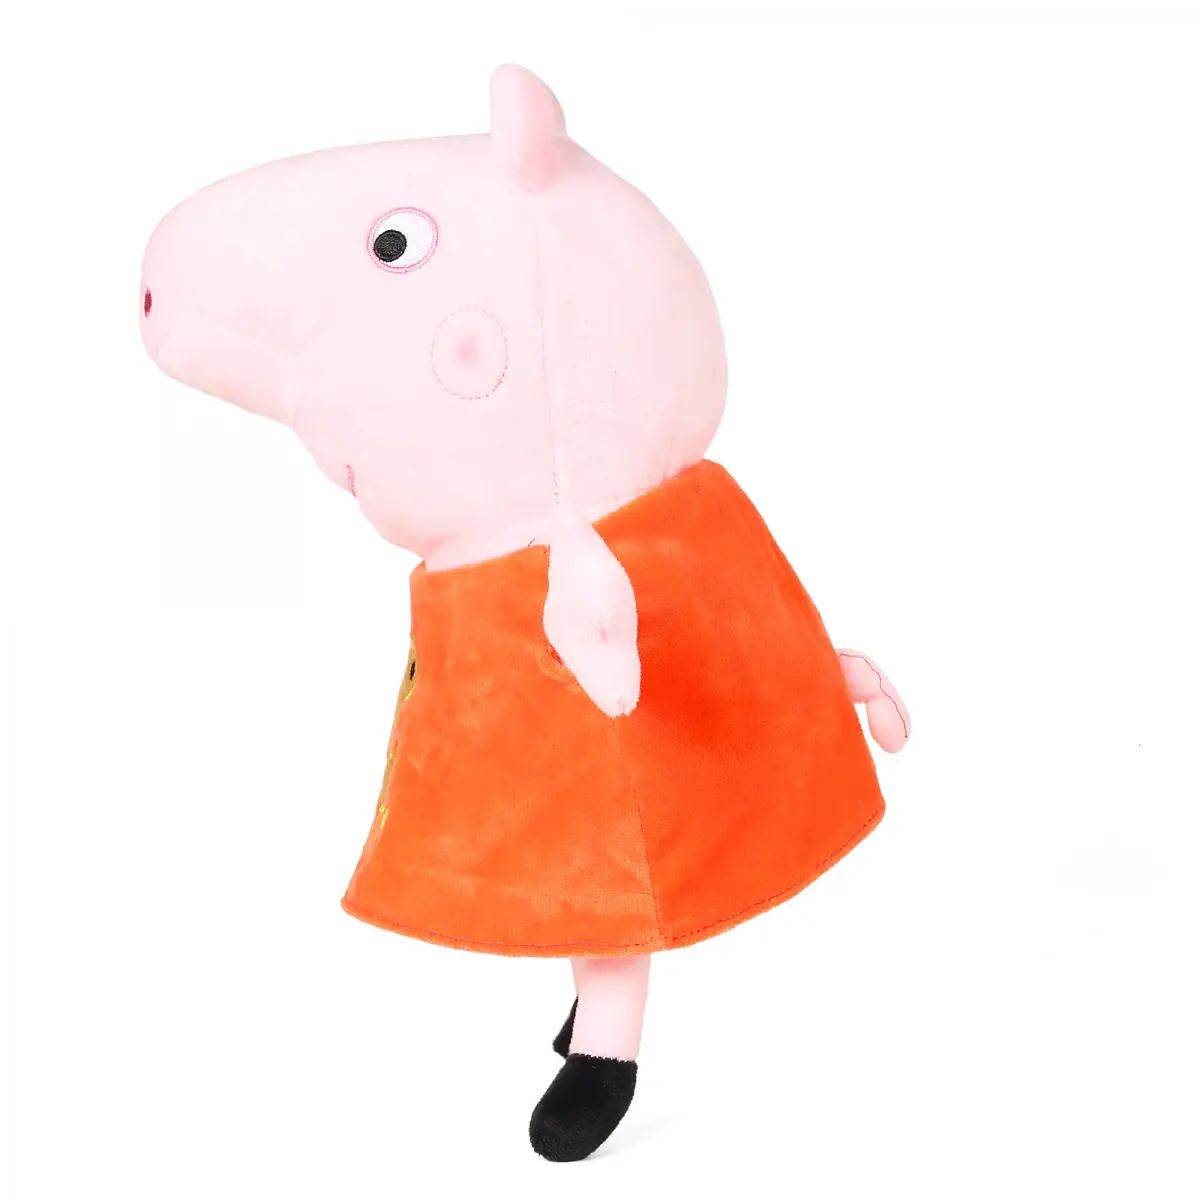 Peppa Pig Adorable Peppa Soft Toy for Kids, 30cm, 18M+, Multicolour